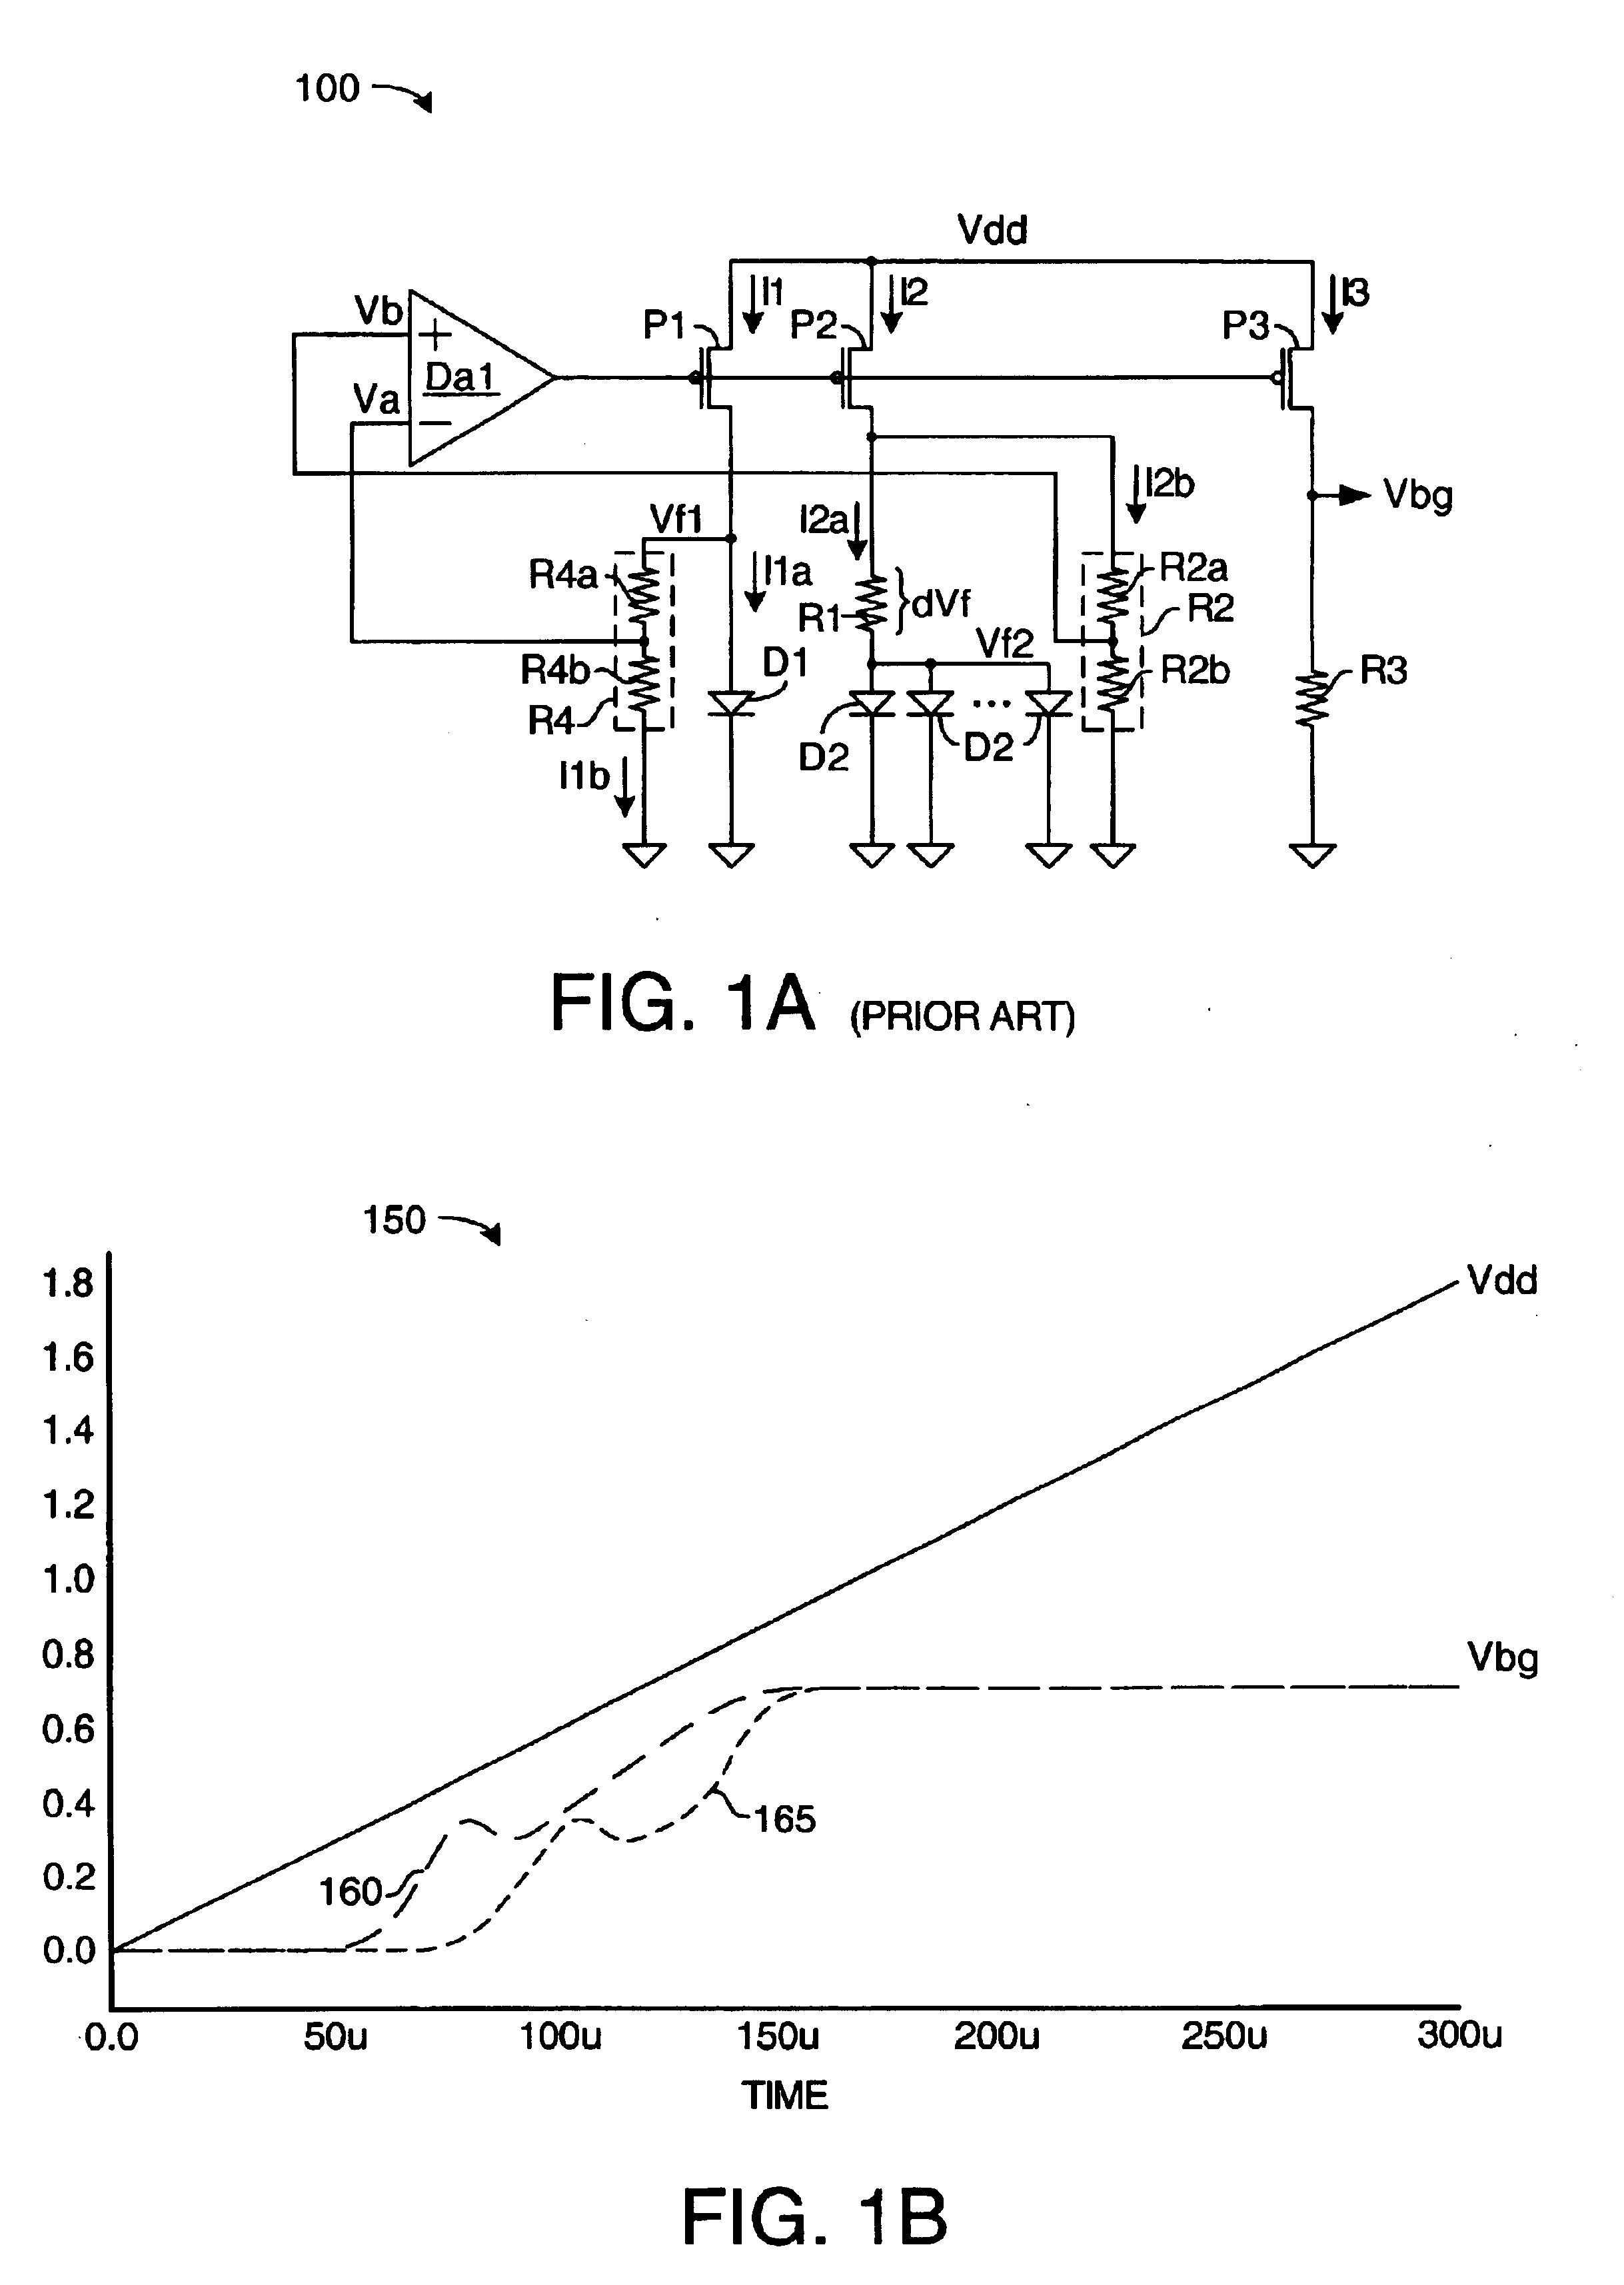 Power-on-reset circuit with temperature compensation